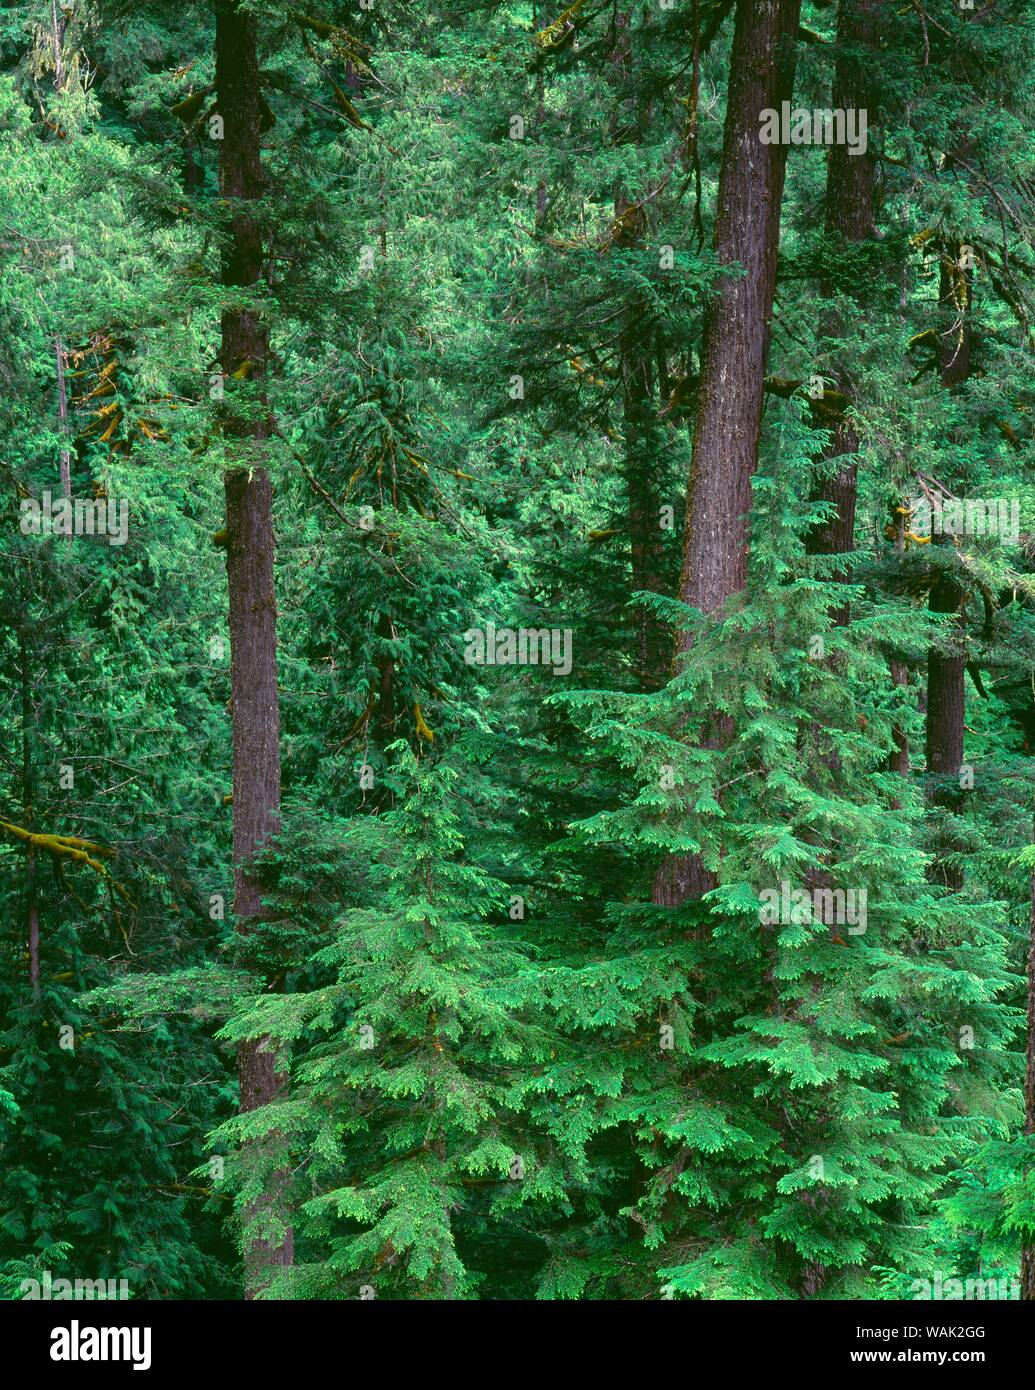 USA, Oregon, Willamette National Forest. Middle Santiam Wilderness, Old-growth forest with large Douglas fir and western hemlock trees. Stock Photo